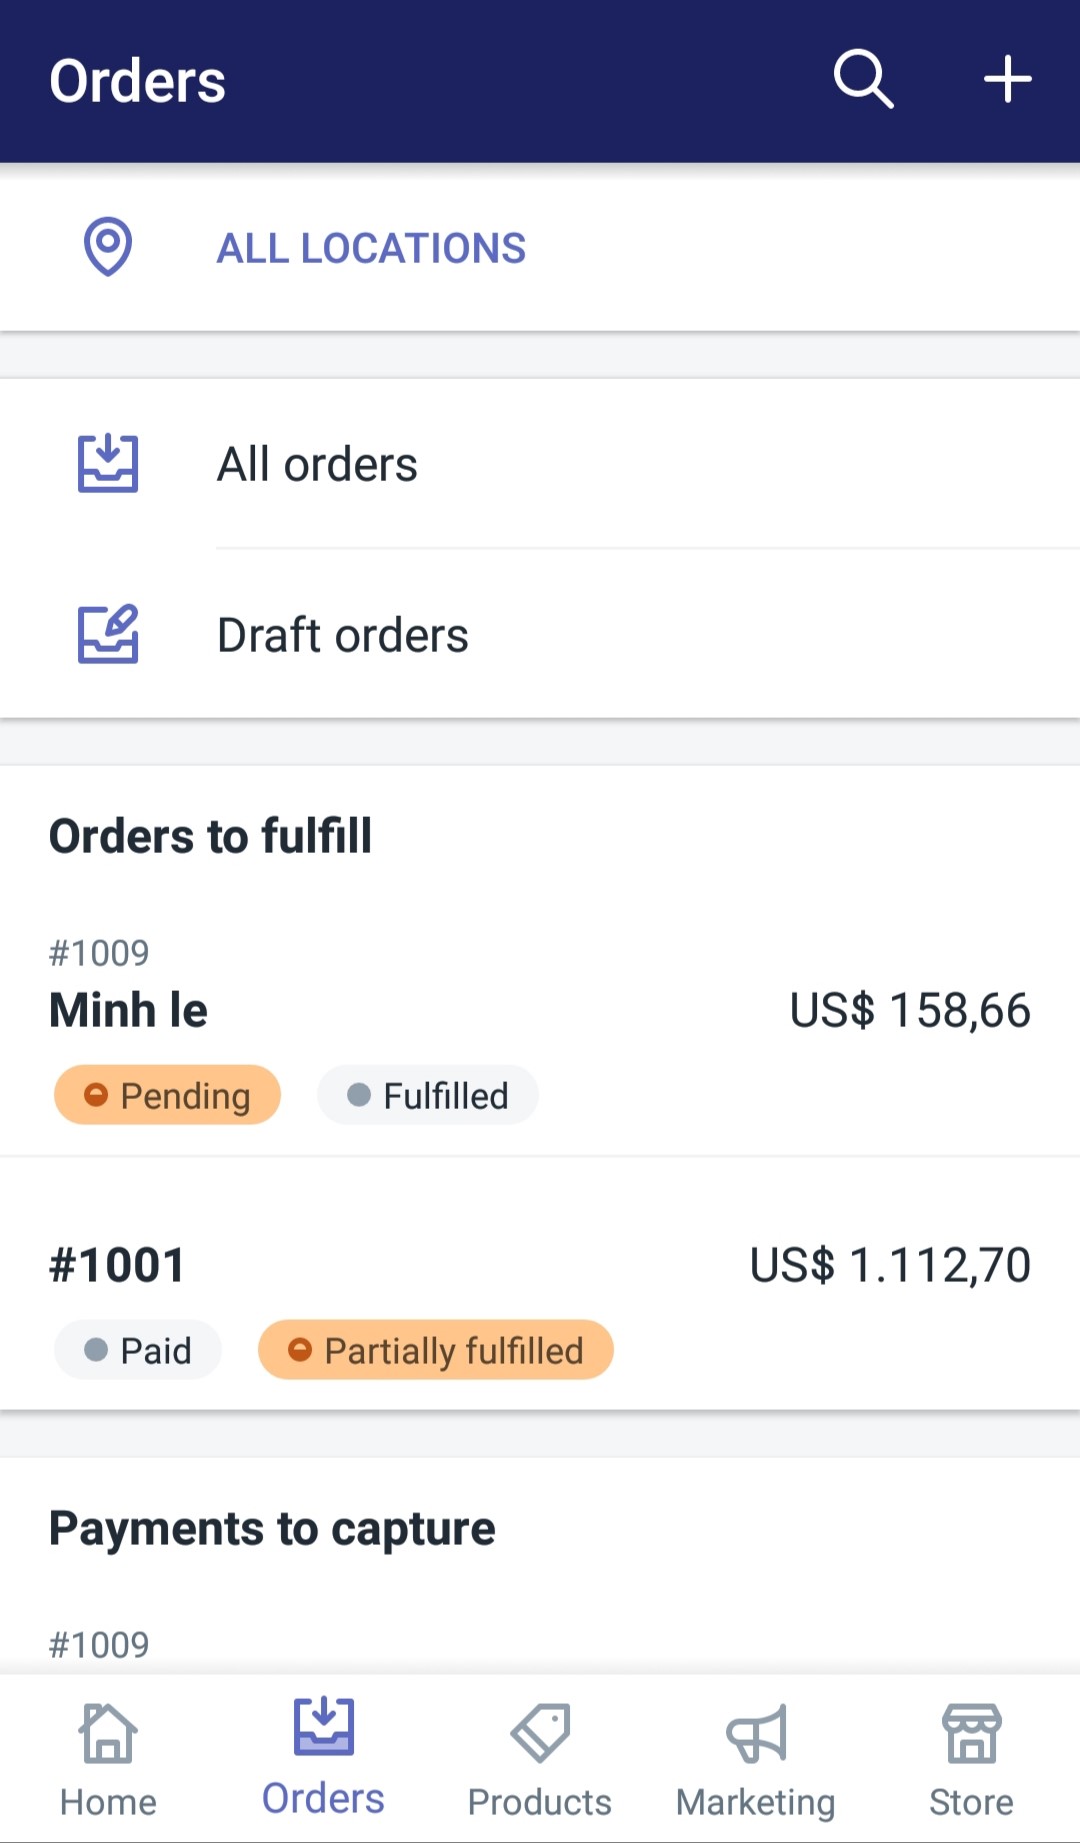 How to find or complete an existing draft order on Shopify